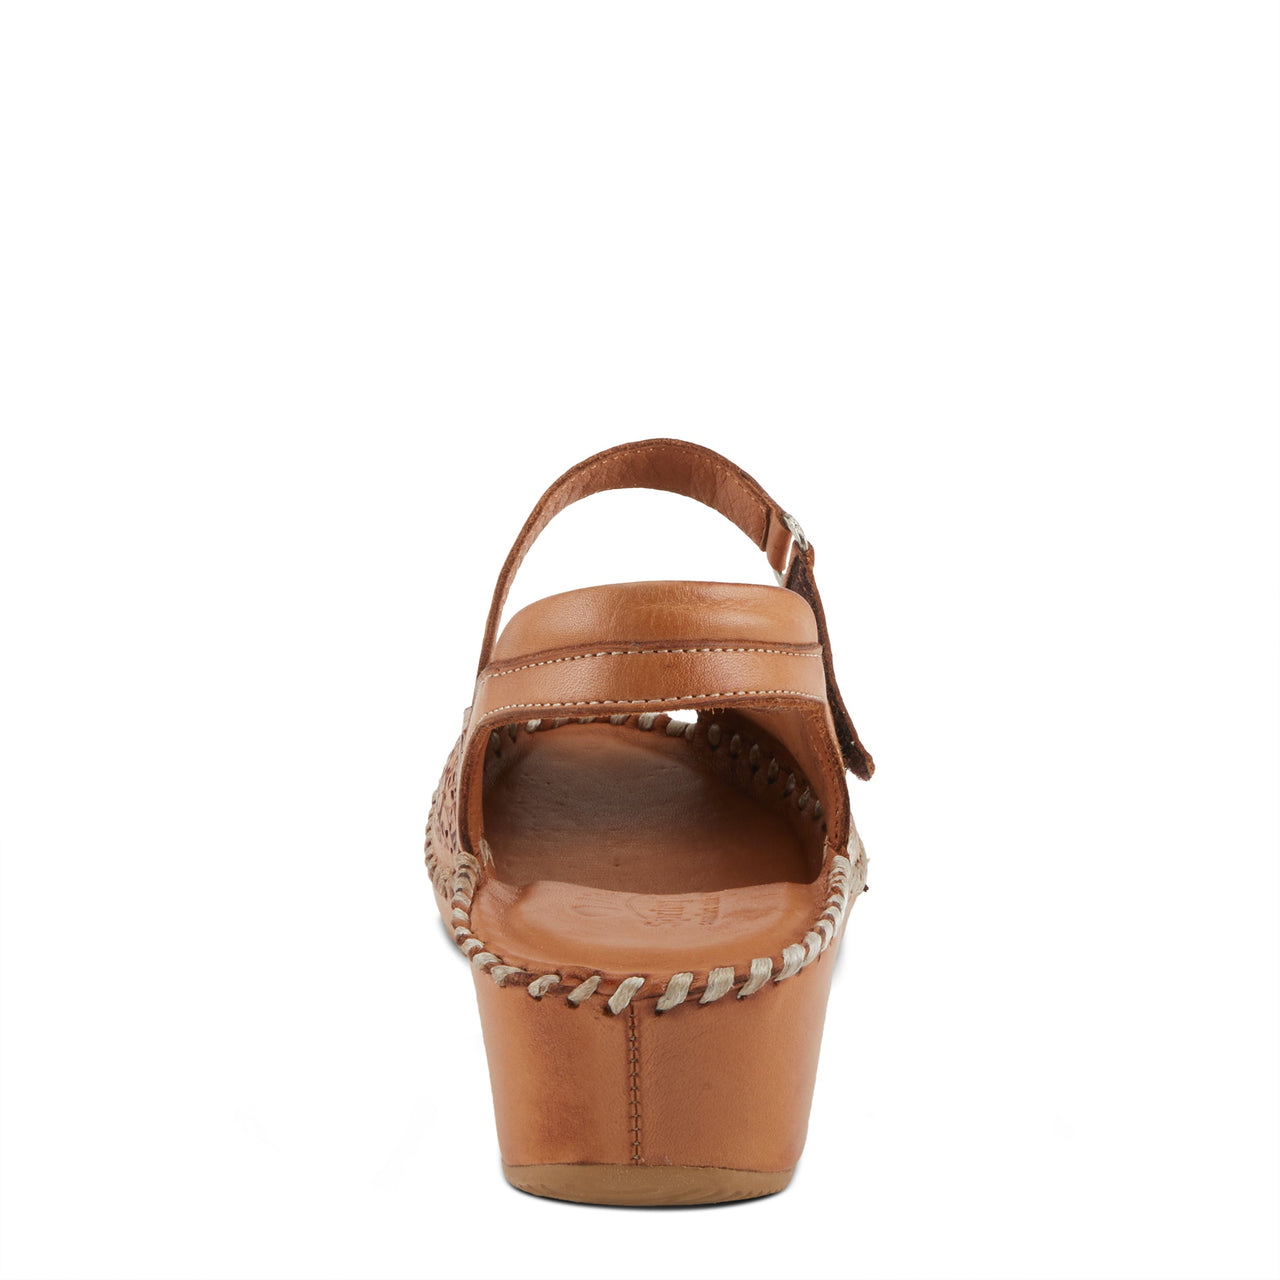 High-quality and durable Spring Step Santonio Sandals for long-lasting wear